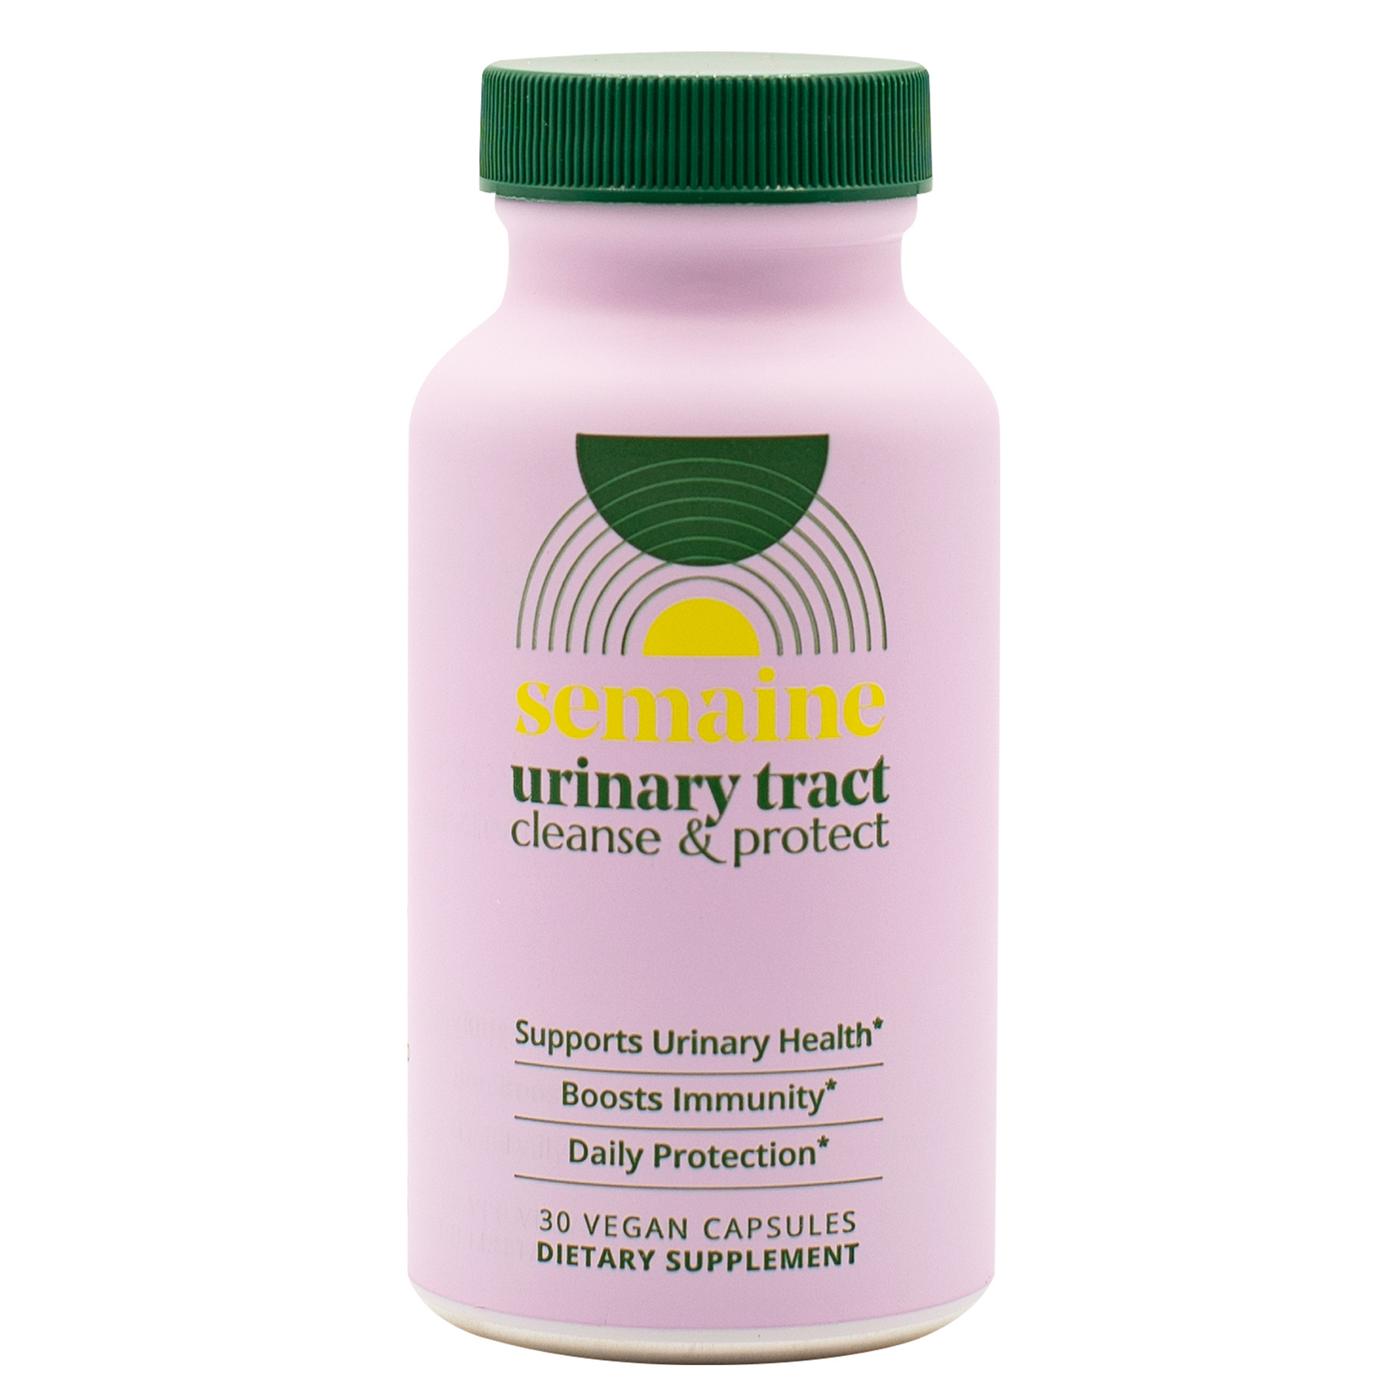 Semaine Health Urinary Tract Cleanse & Protect Capsules; image 1 of 3